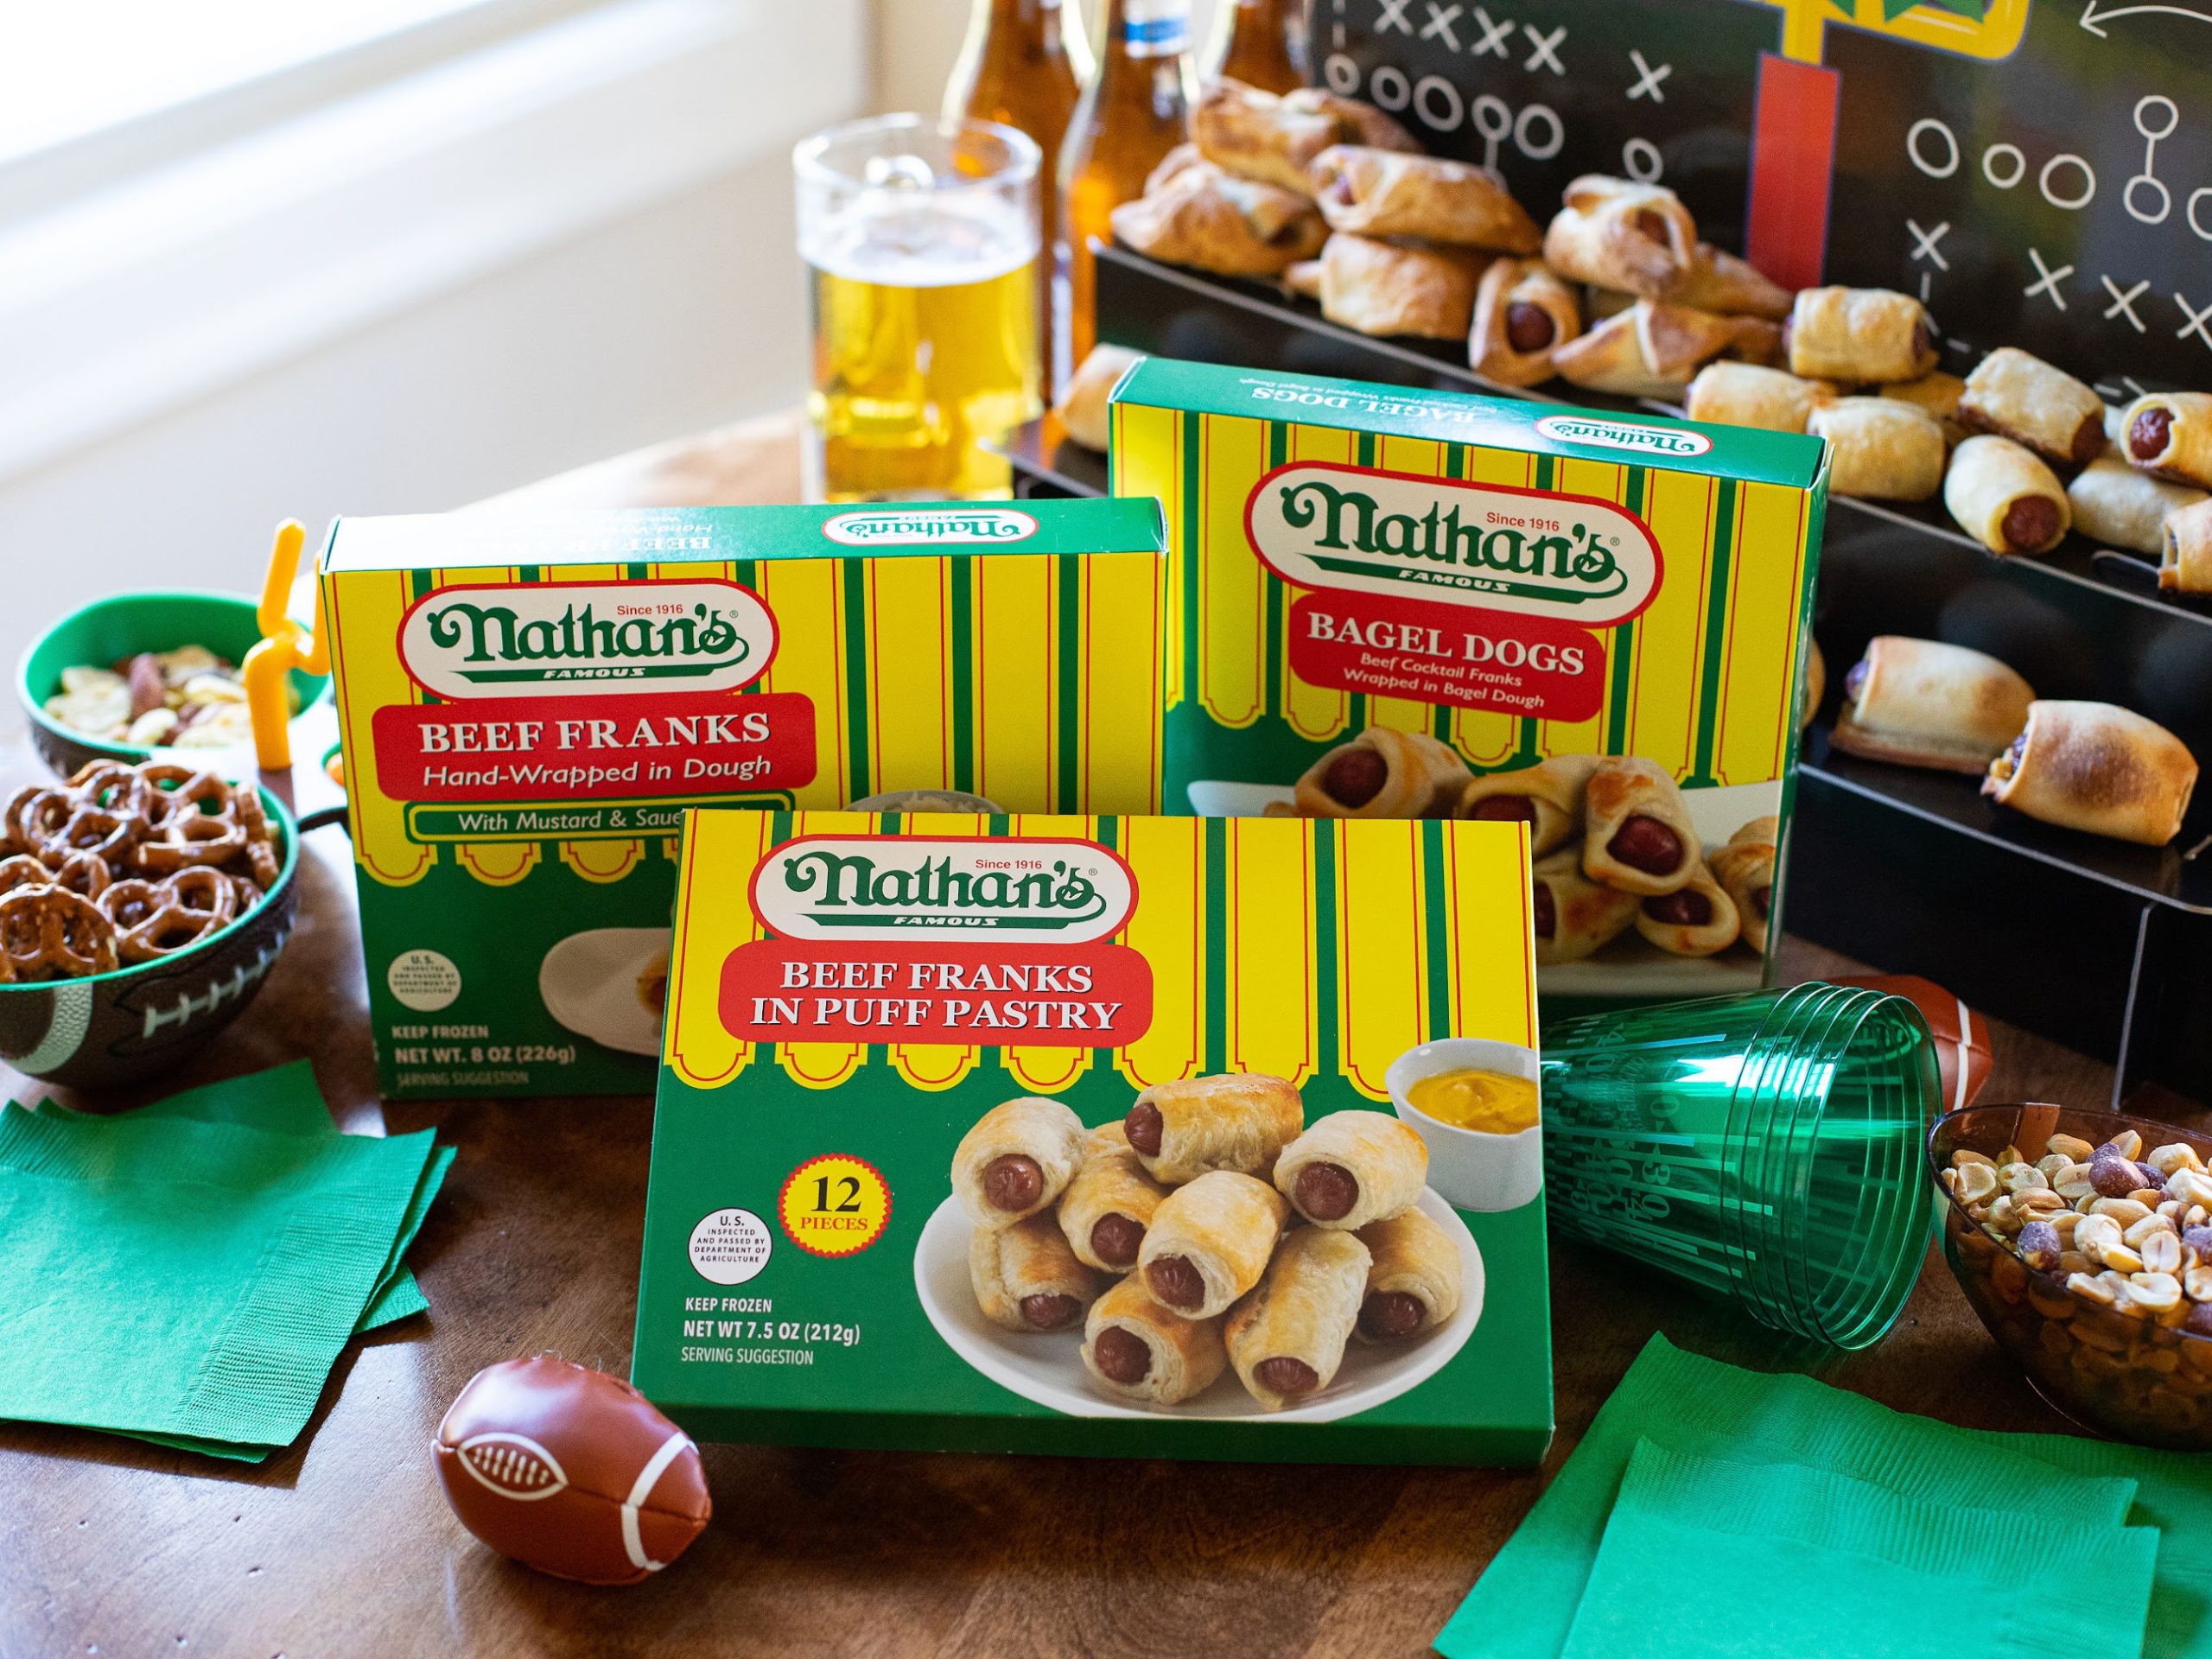 Get Ready For The Big Game With A Super Deal On Your Favorite Nathan's Snacks! on I Heart Publix